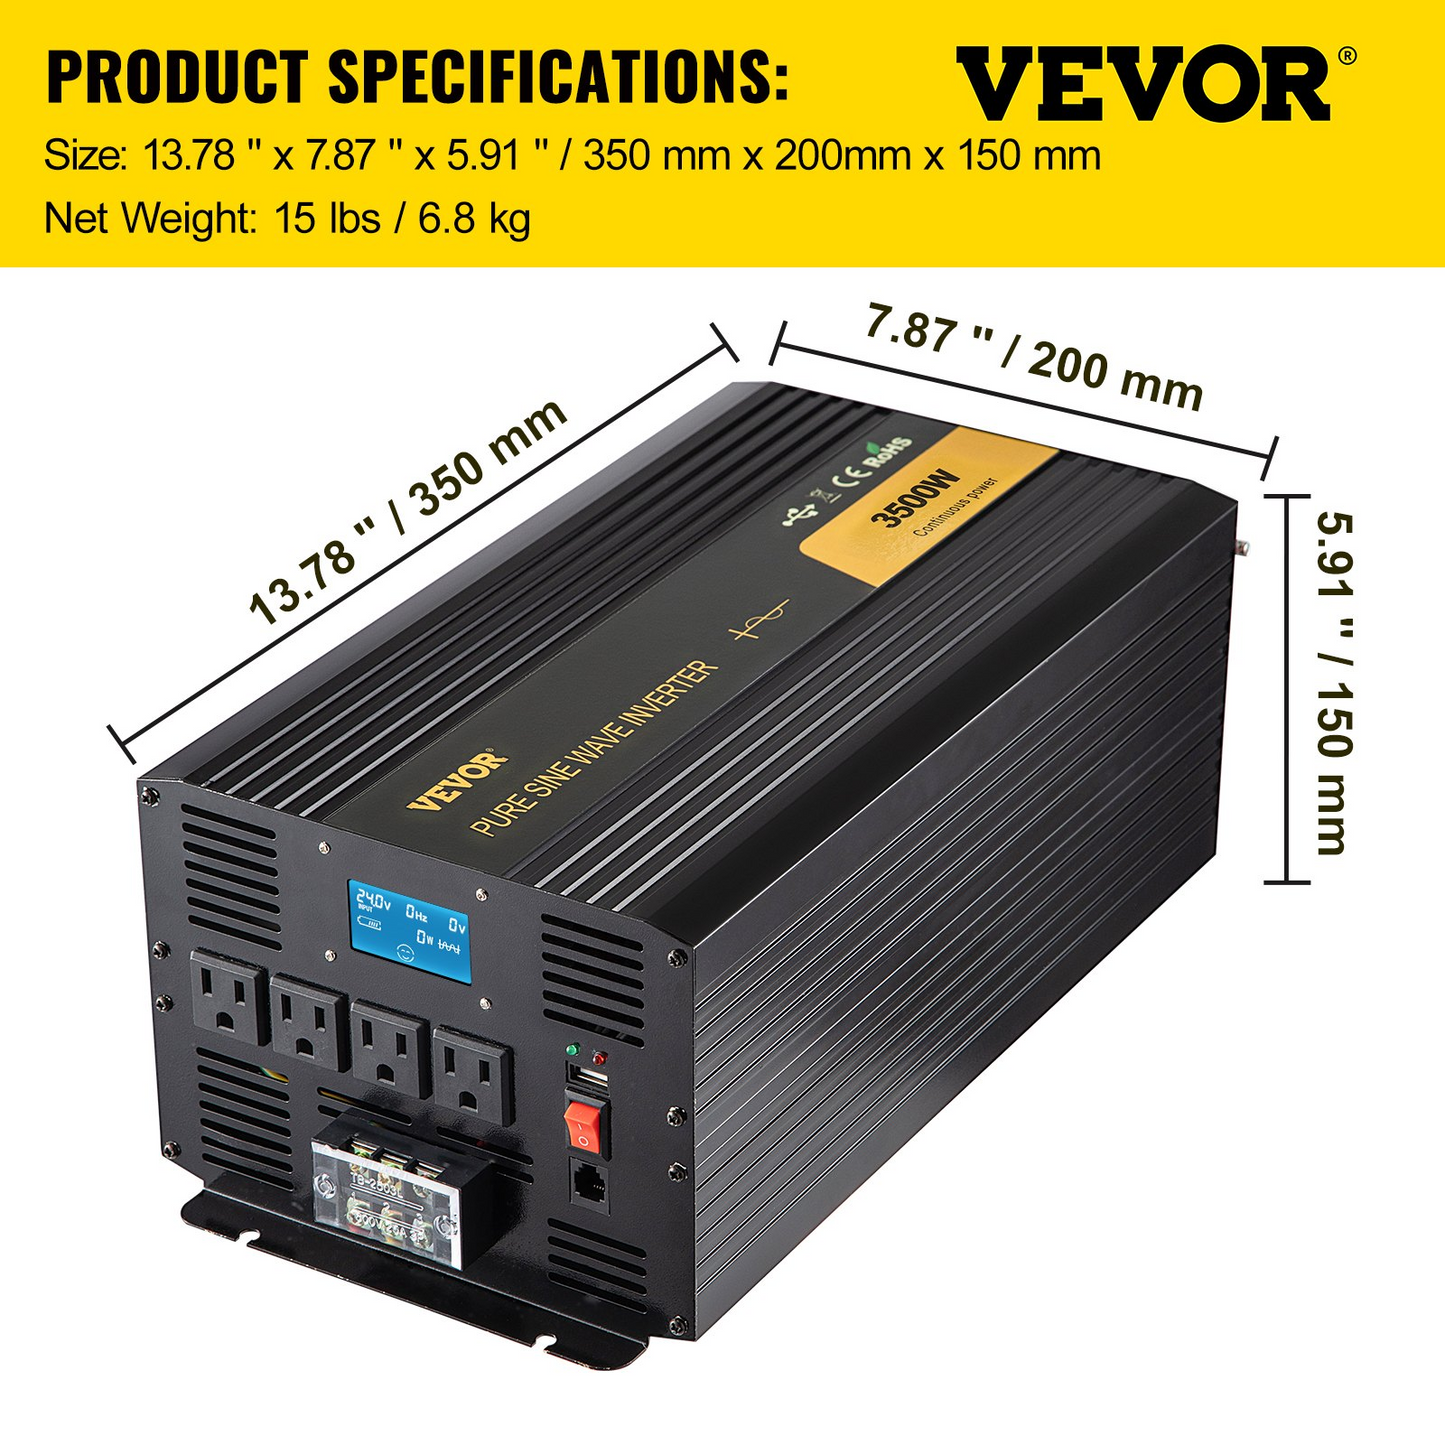 VEVOR Pure Sine Wave Inverter, 3500 Watt Power Inverter, DC 24V to AC 120V Car Inverter, with USB Port, LCD Display, and Remote Controller Power Converter, for RV Truck Car Solar System Travel Camping, Goodies N Stuff